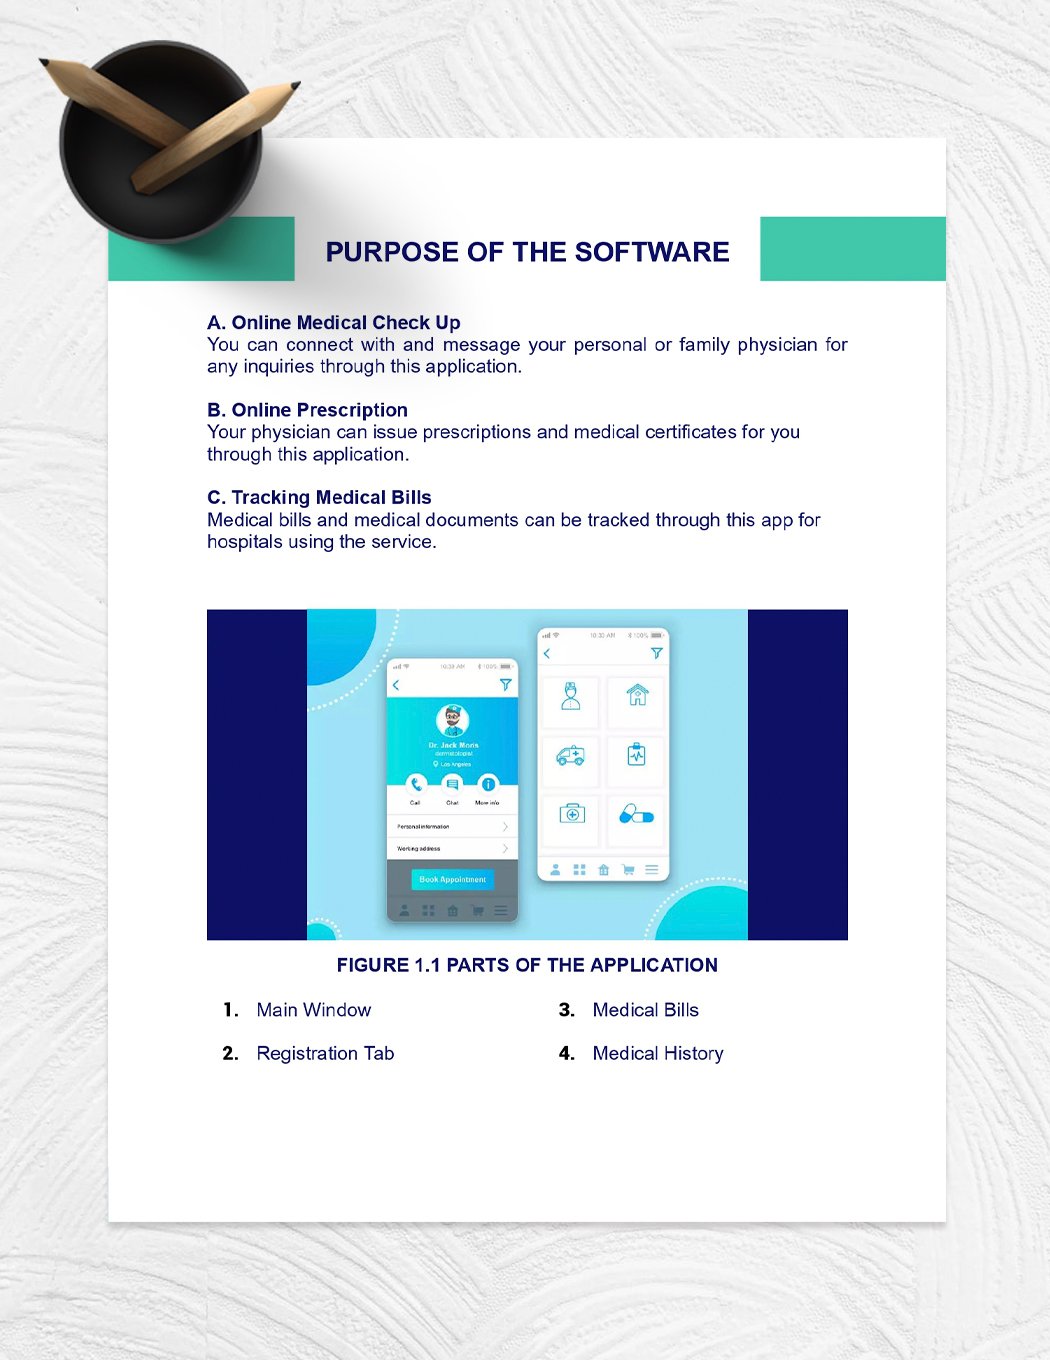 Software Instruction Manual Template